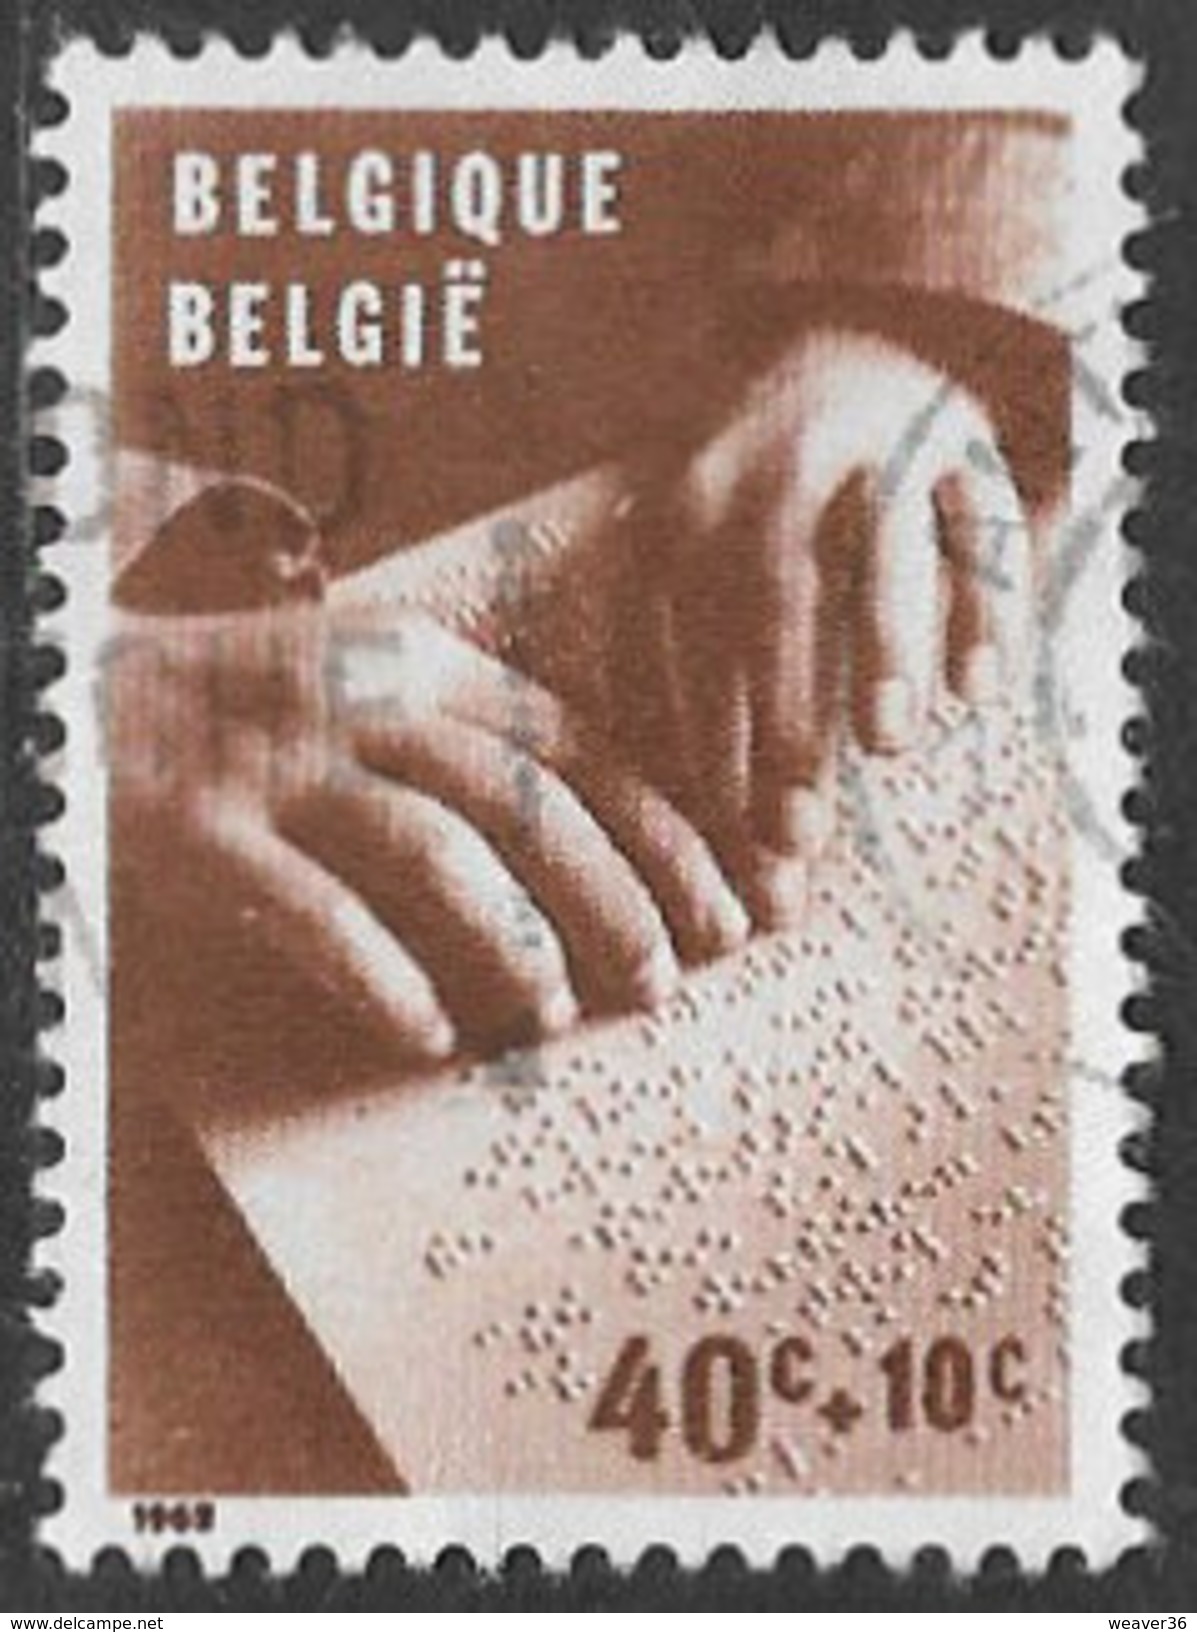 Belgium SG1825 1962 Disabled Children Relief Funds 40c+10c Good/fine Used [33/28670/6D] - Used Stamps